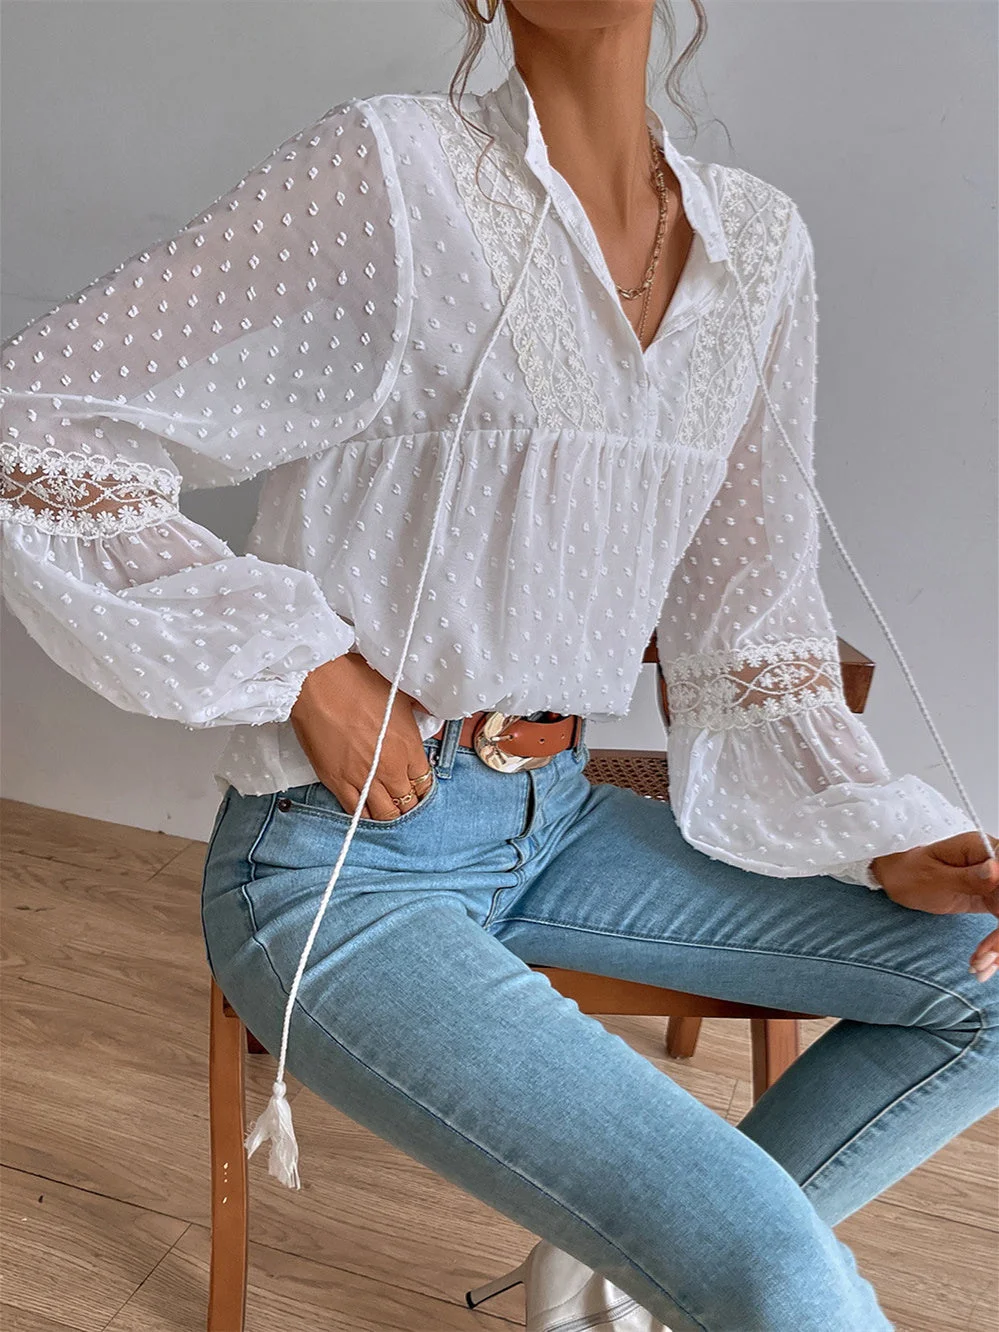 Women's Long Sleeve V-neck Lace Floral Printed Lace-up Tops